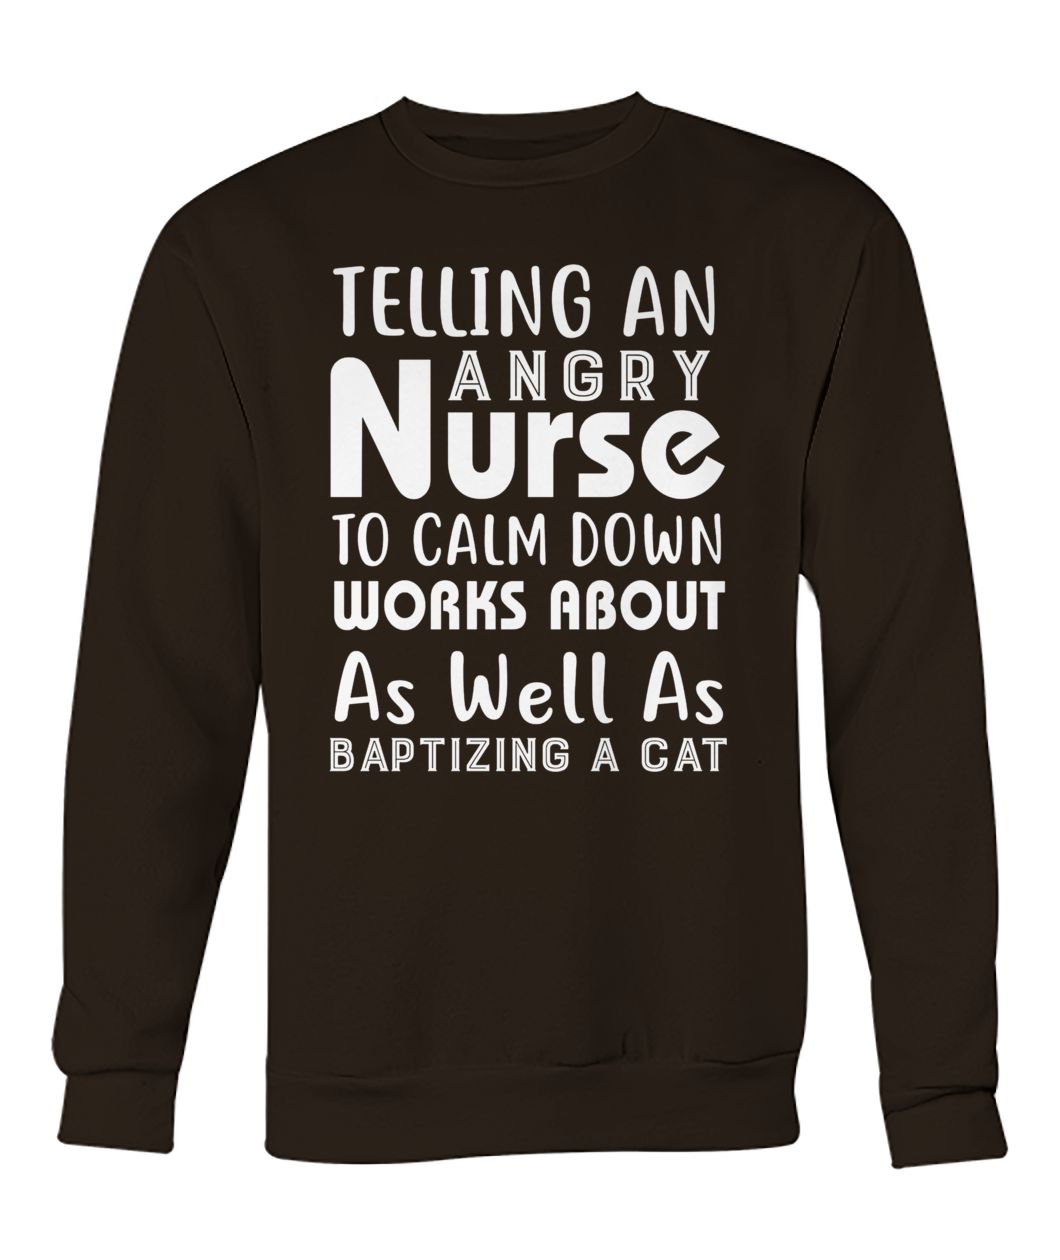 Telling an angry nurse to clam down workds about as well as baptizing a cat crew neck sweatshirt